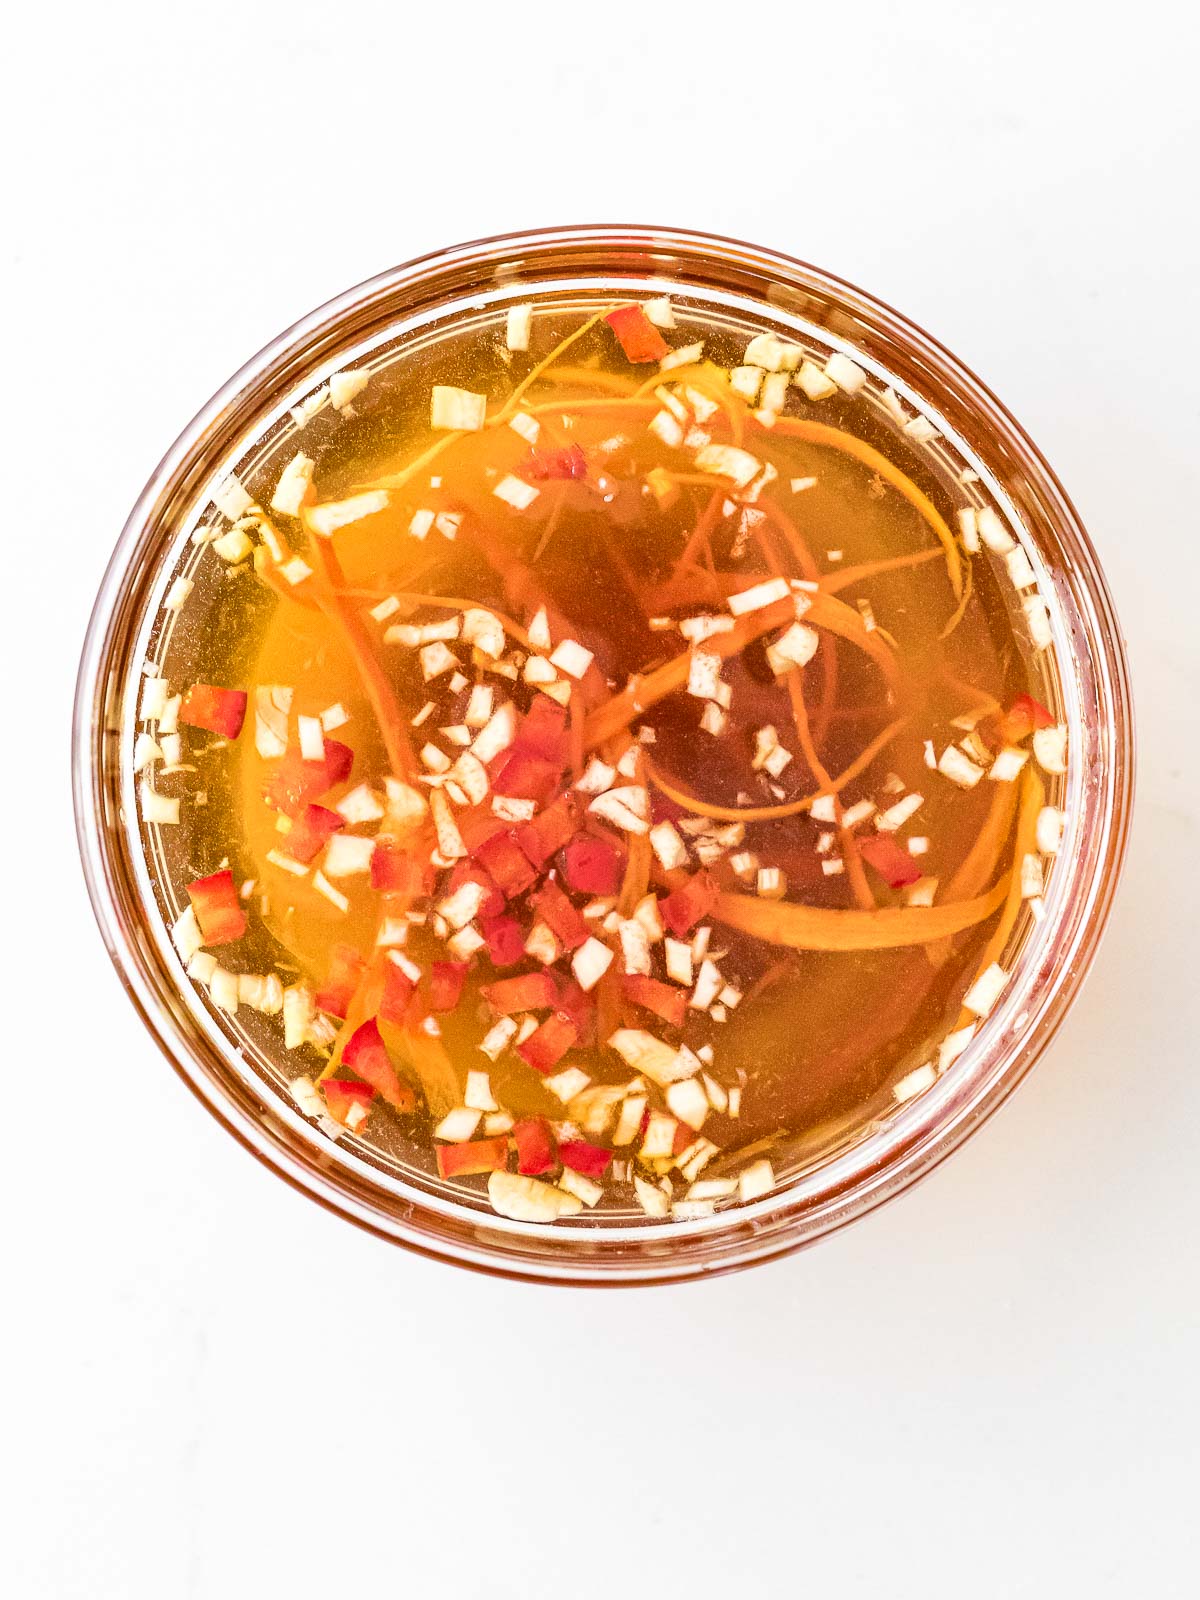 Vietnamese fish sauce dipping sauce in a glass bowl, nuoc cham